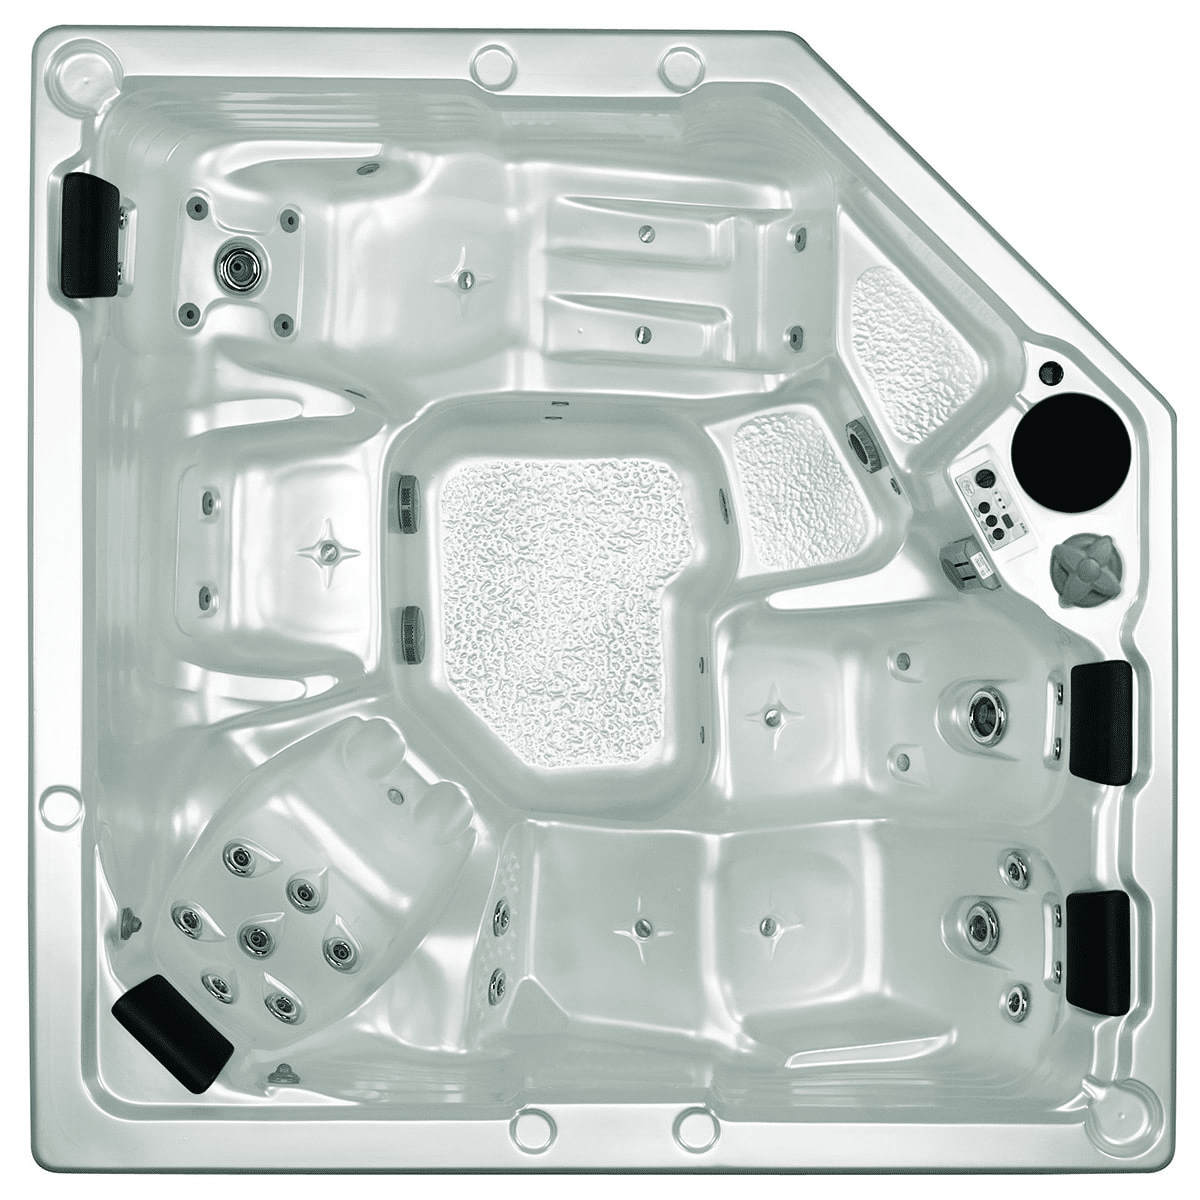 This hot tub can fit up to 6 people and comes equipped with a 7 Jet “Hot Seat” to really work on those sore muscles.